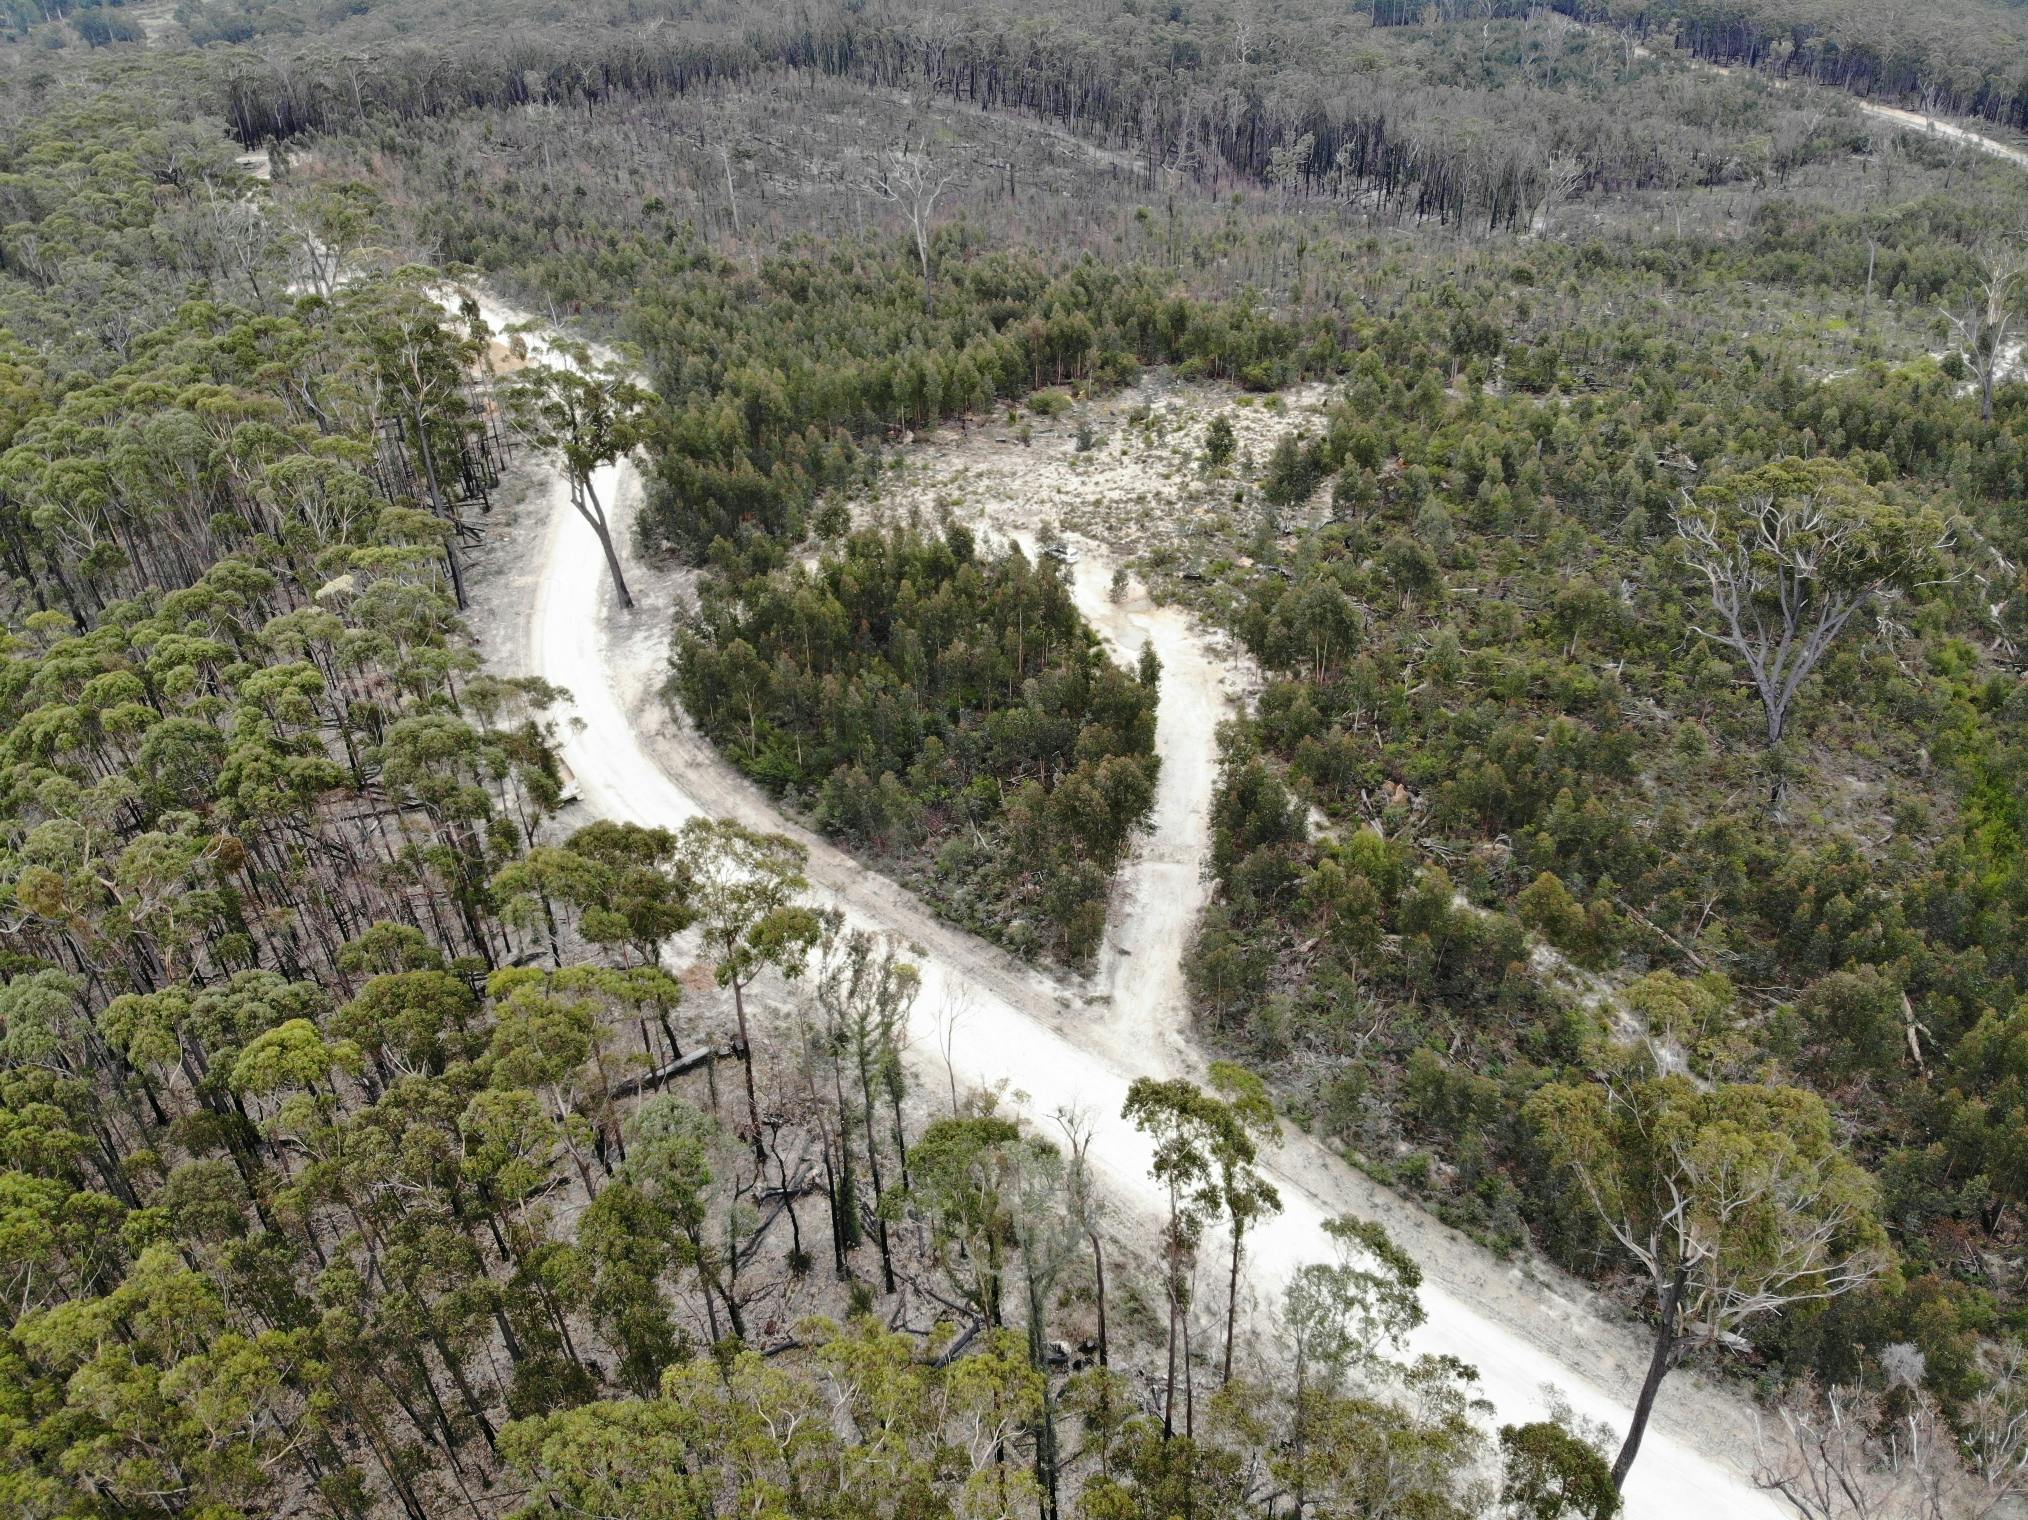 Cann River Transfer1 - proposed site - 15/07/21